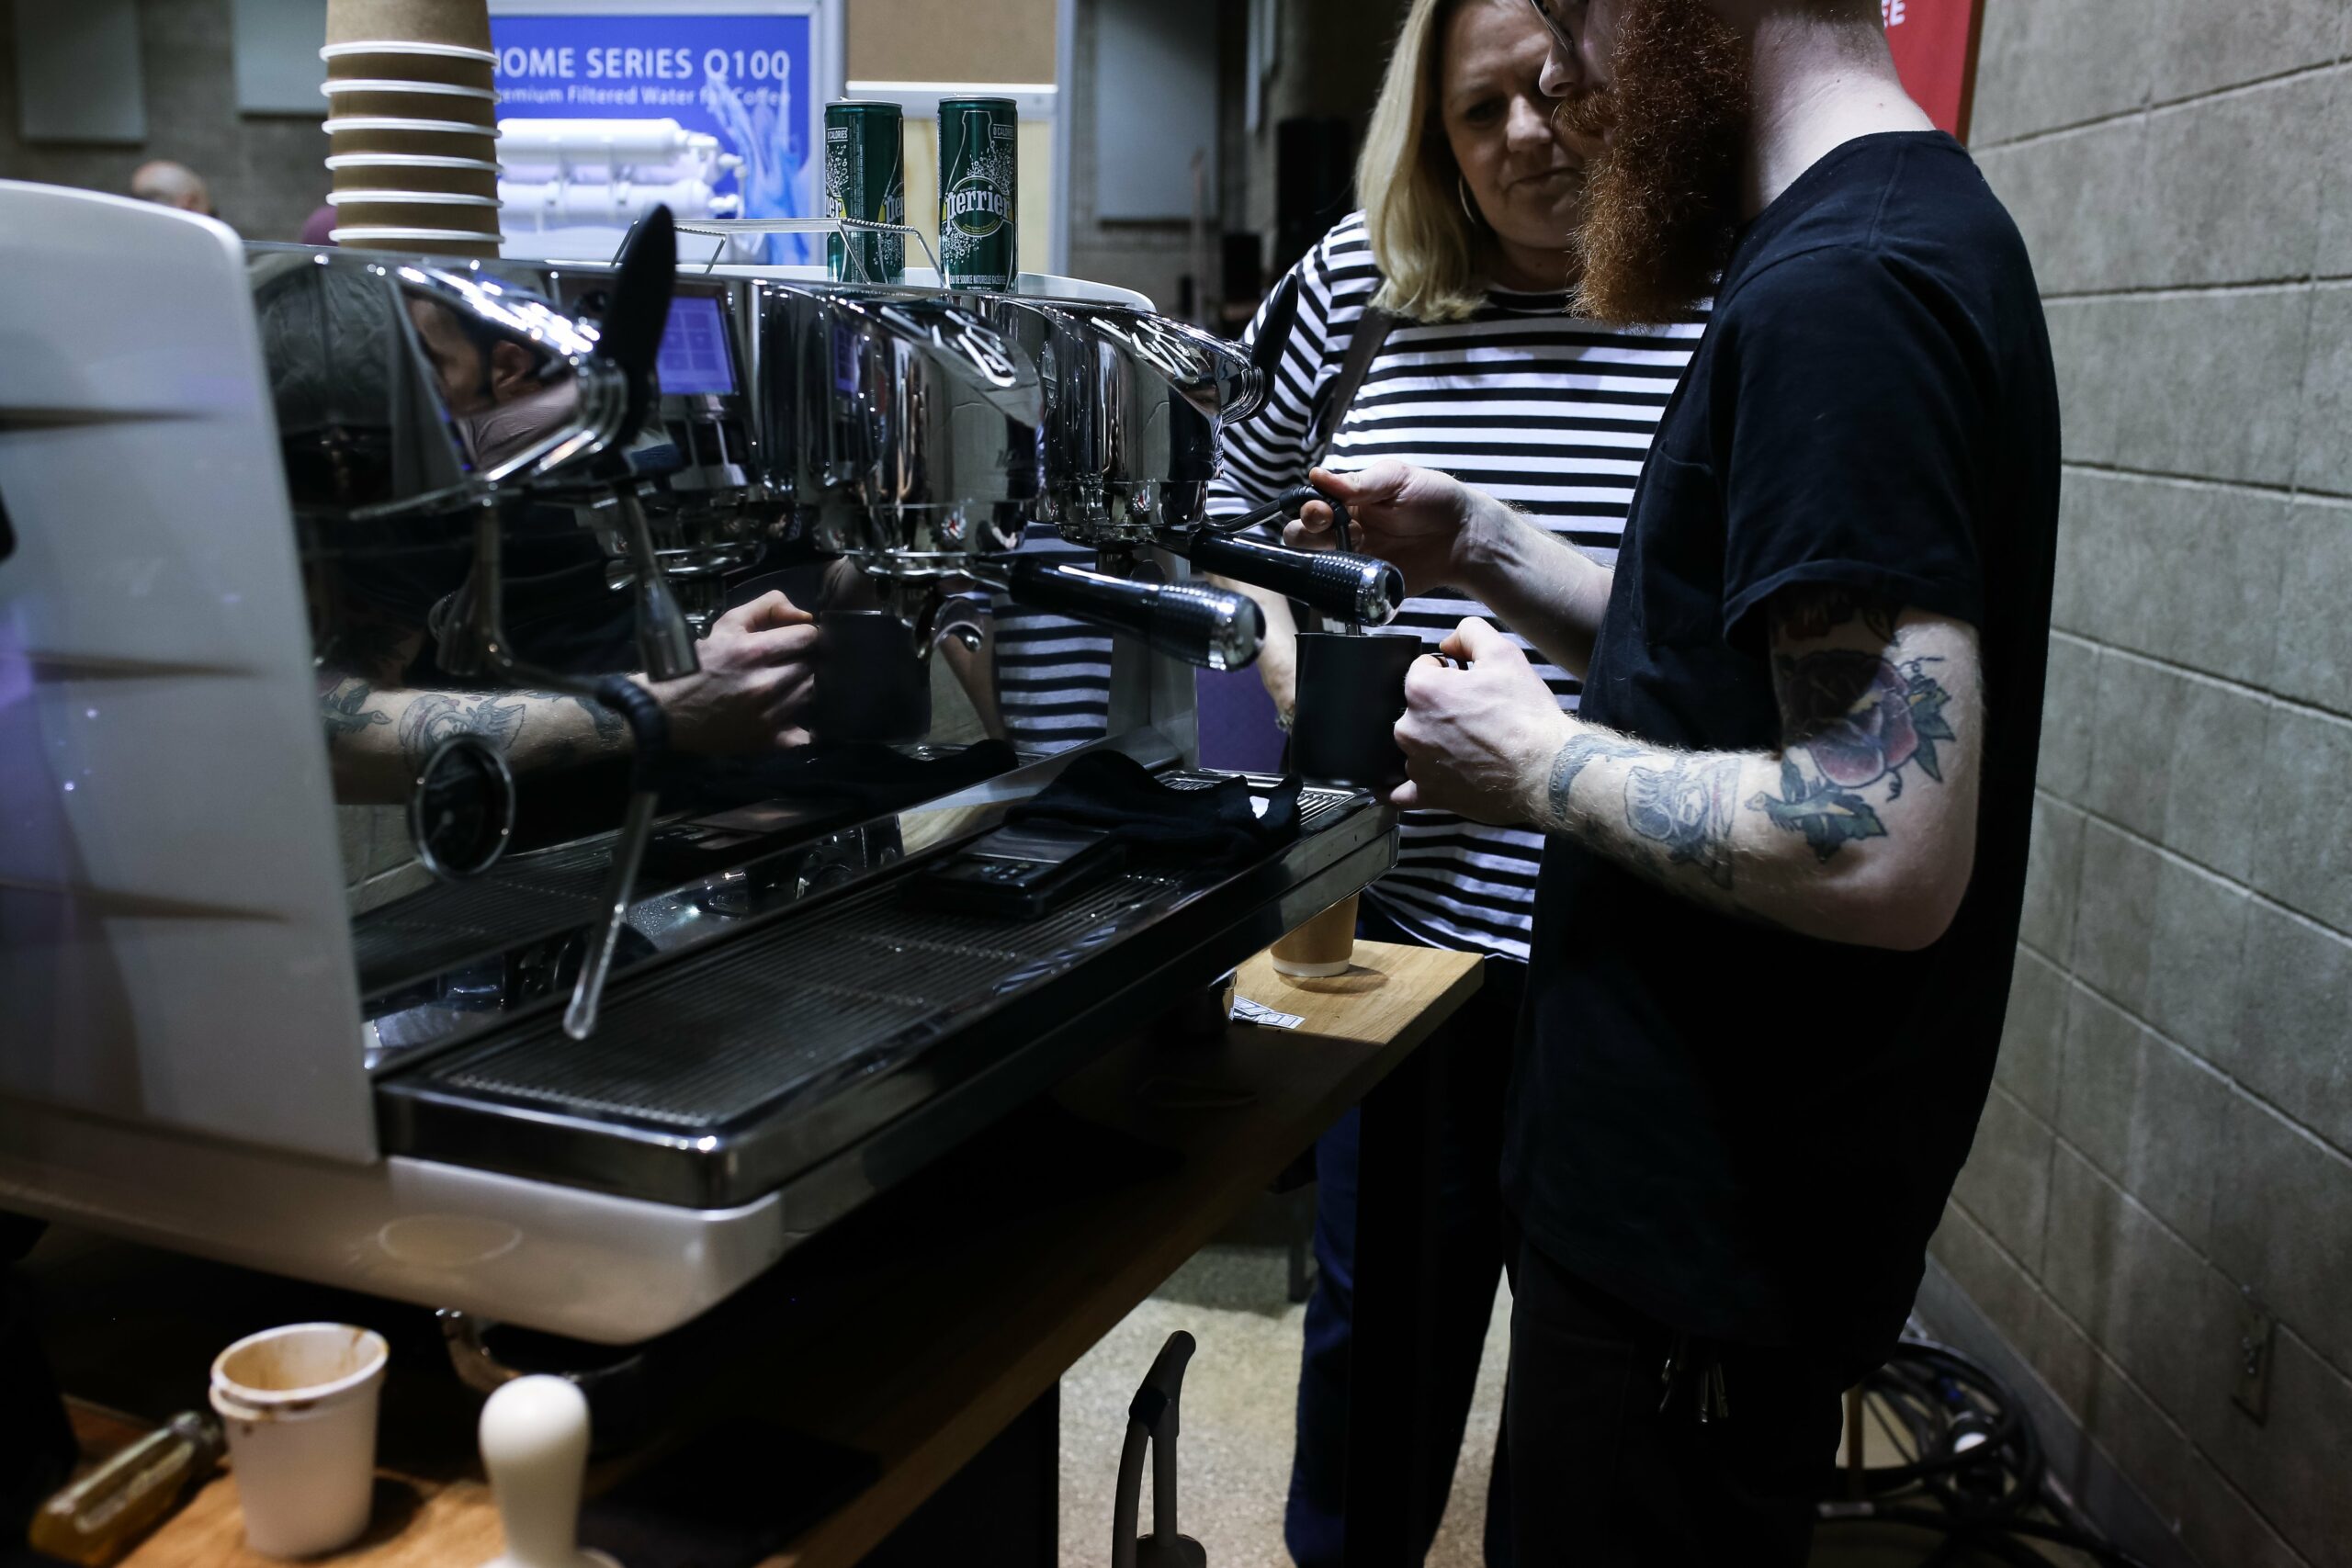 Latte art tips at Hamilton Specialty Coffee show over the weekend.